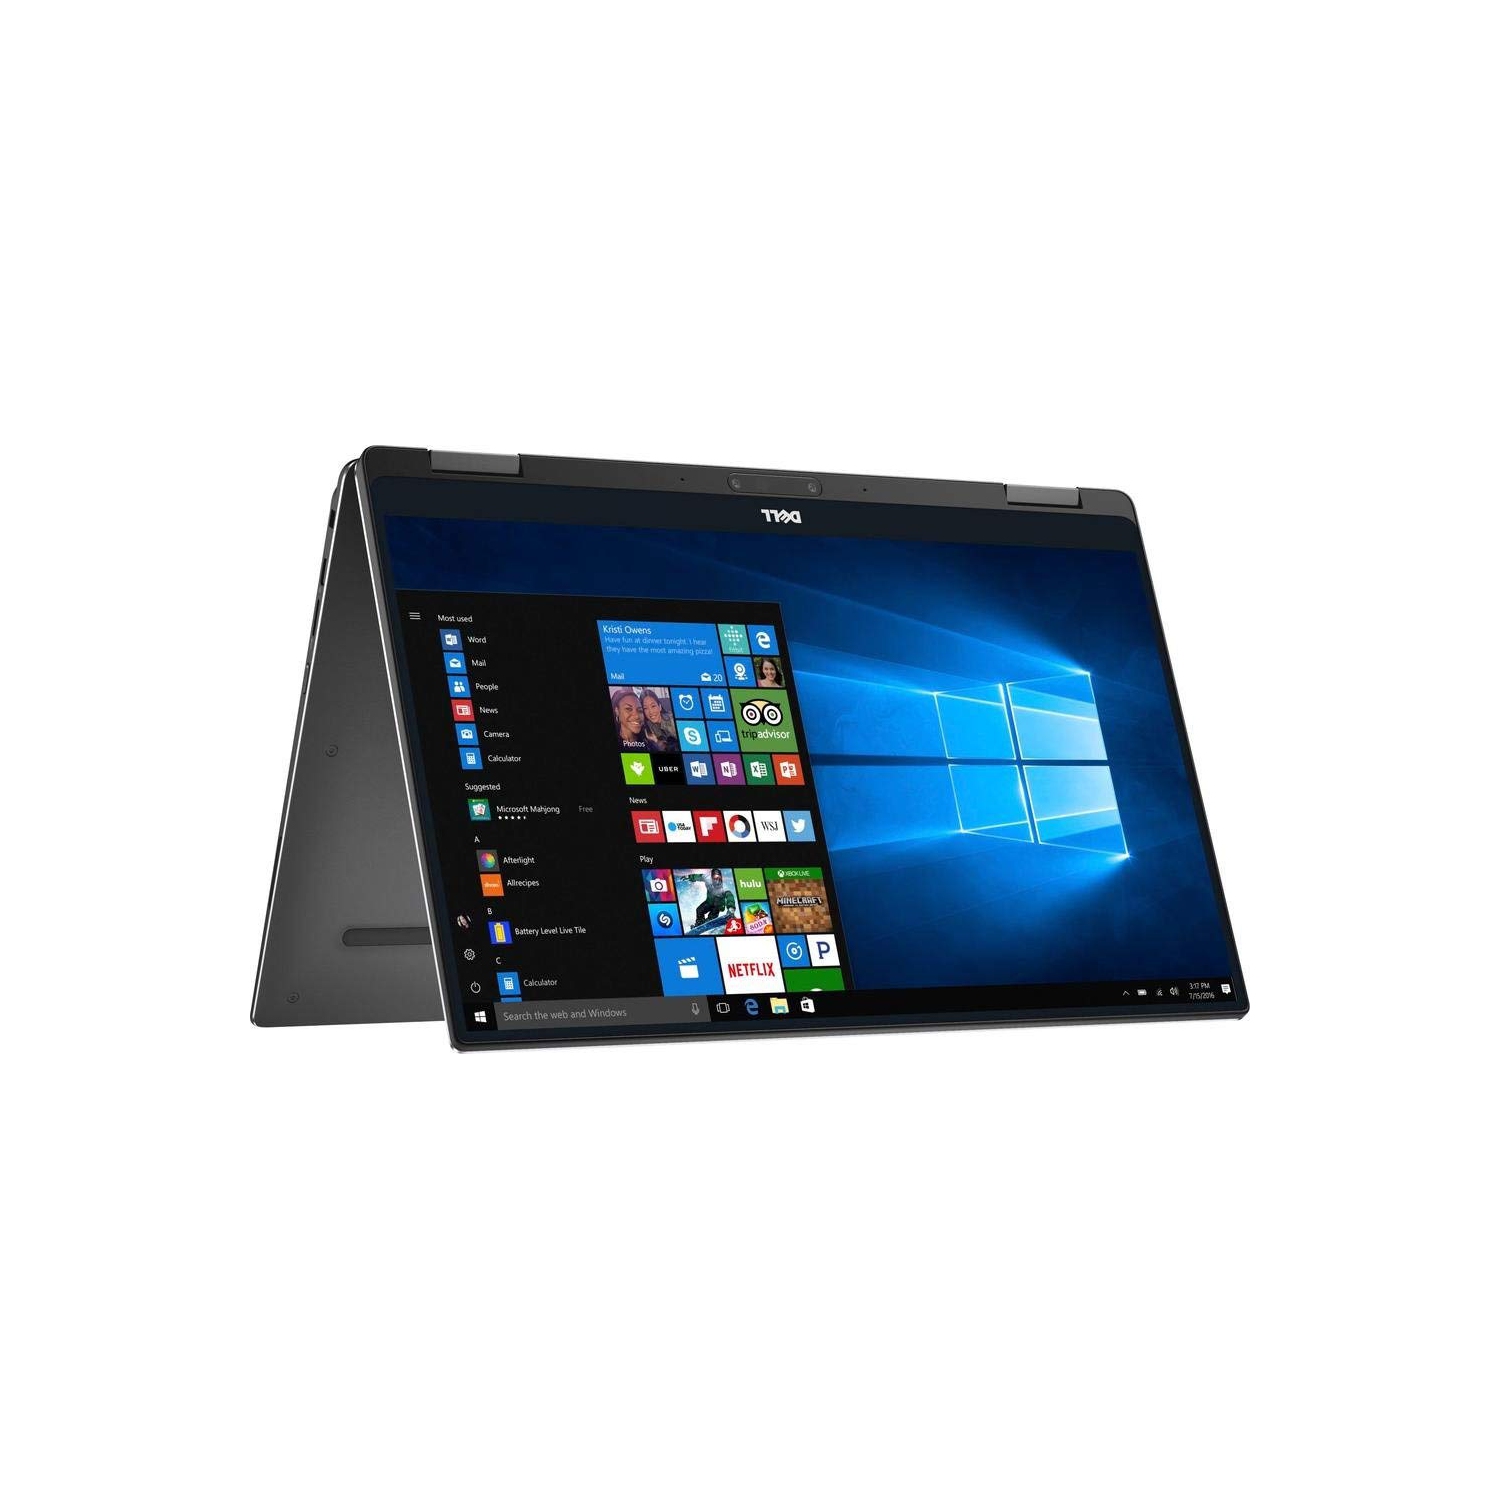 Refurbished (Good) - DELL XPS 13 9365, 13" / 2-in-1 Touchscreen -(7th Gen) Intel Core i5-7Y54 -8GB RAM- 1 TB NVMe ( 35X FASTER SSD )- Win 10 Pro.